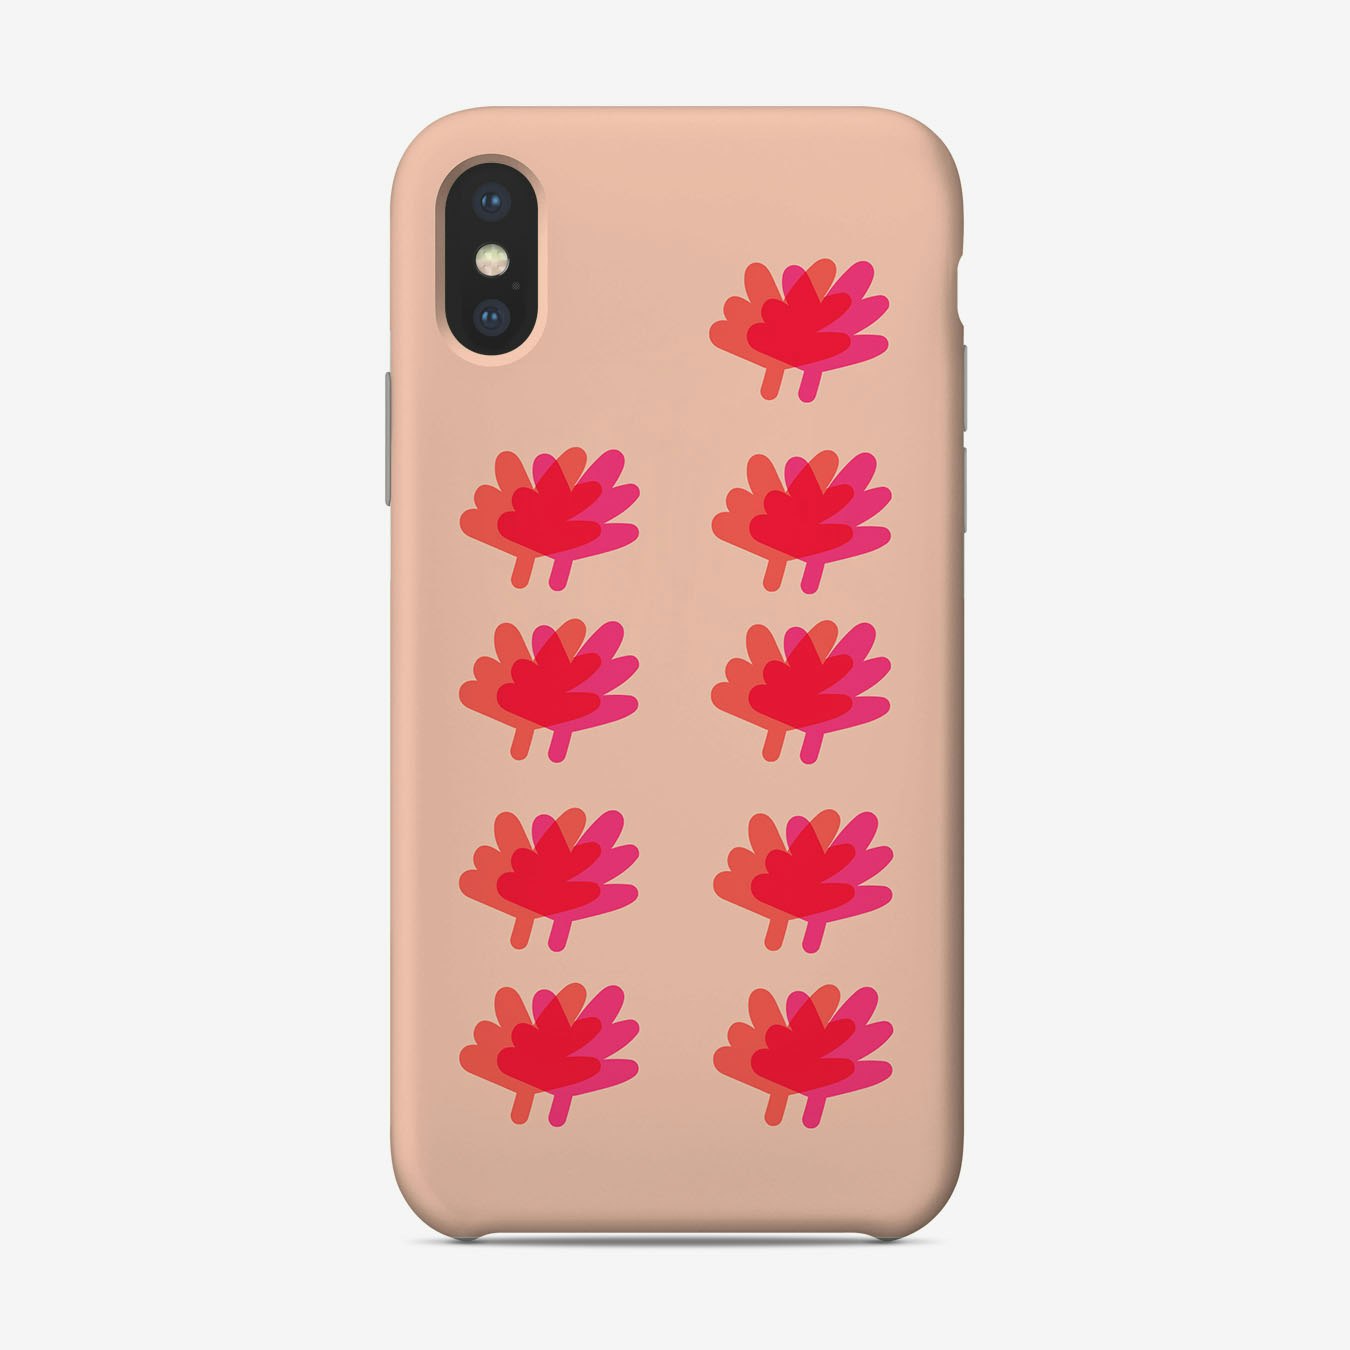 Bud Phone Case by Ktmccrossan - Fy